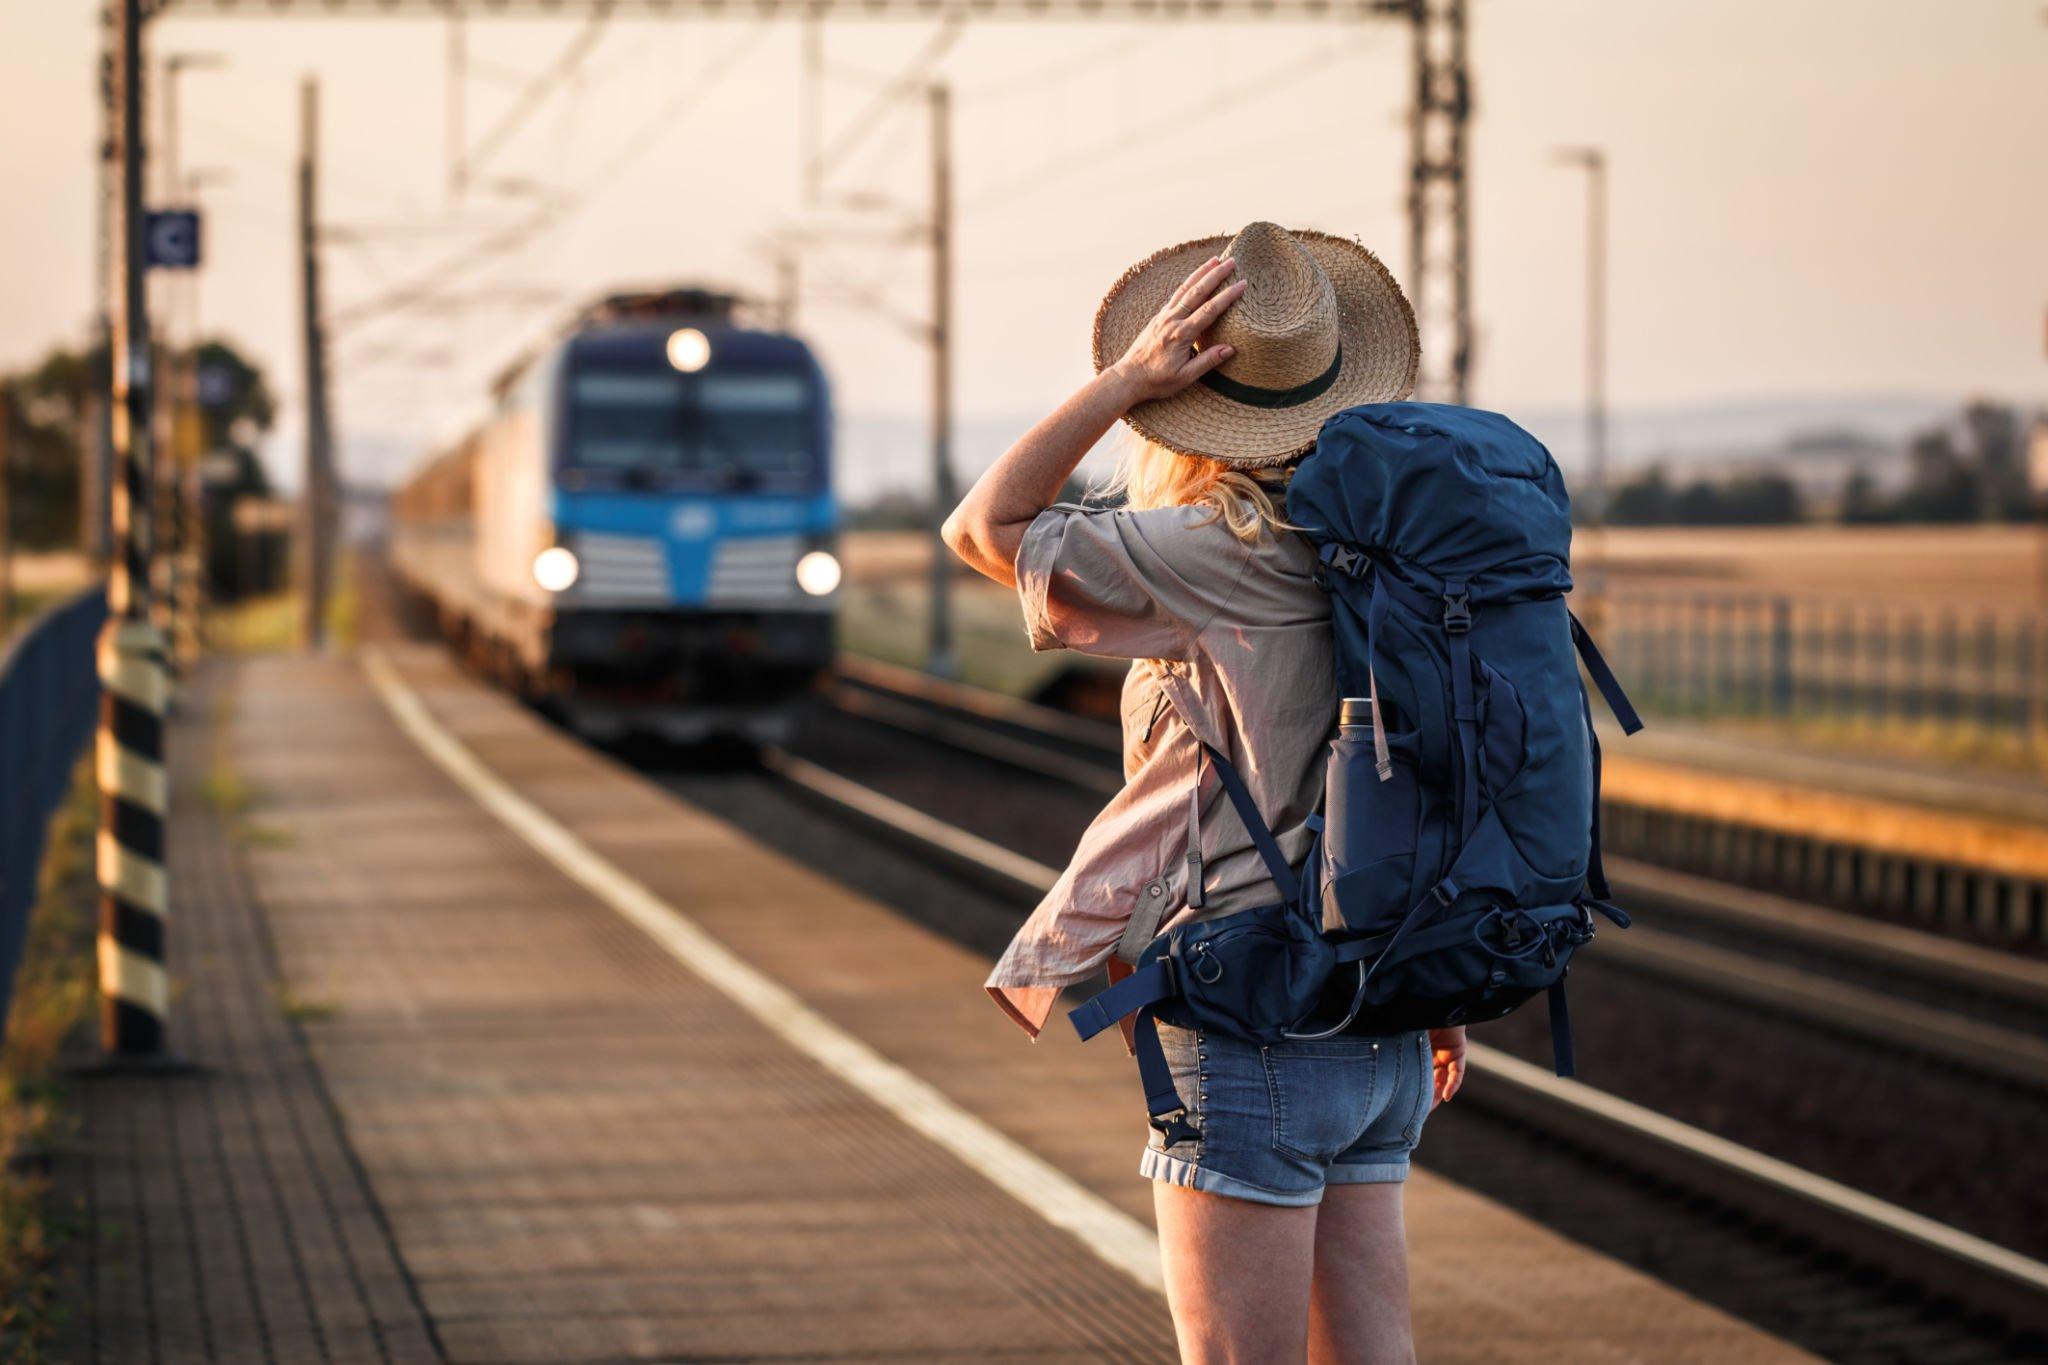 It’s Good for Women to Travel Alone